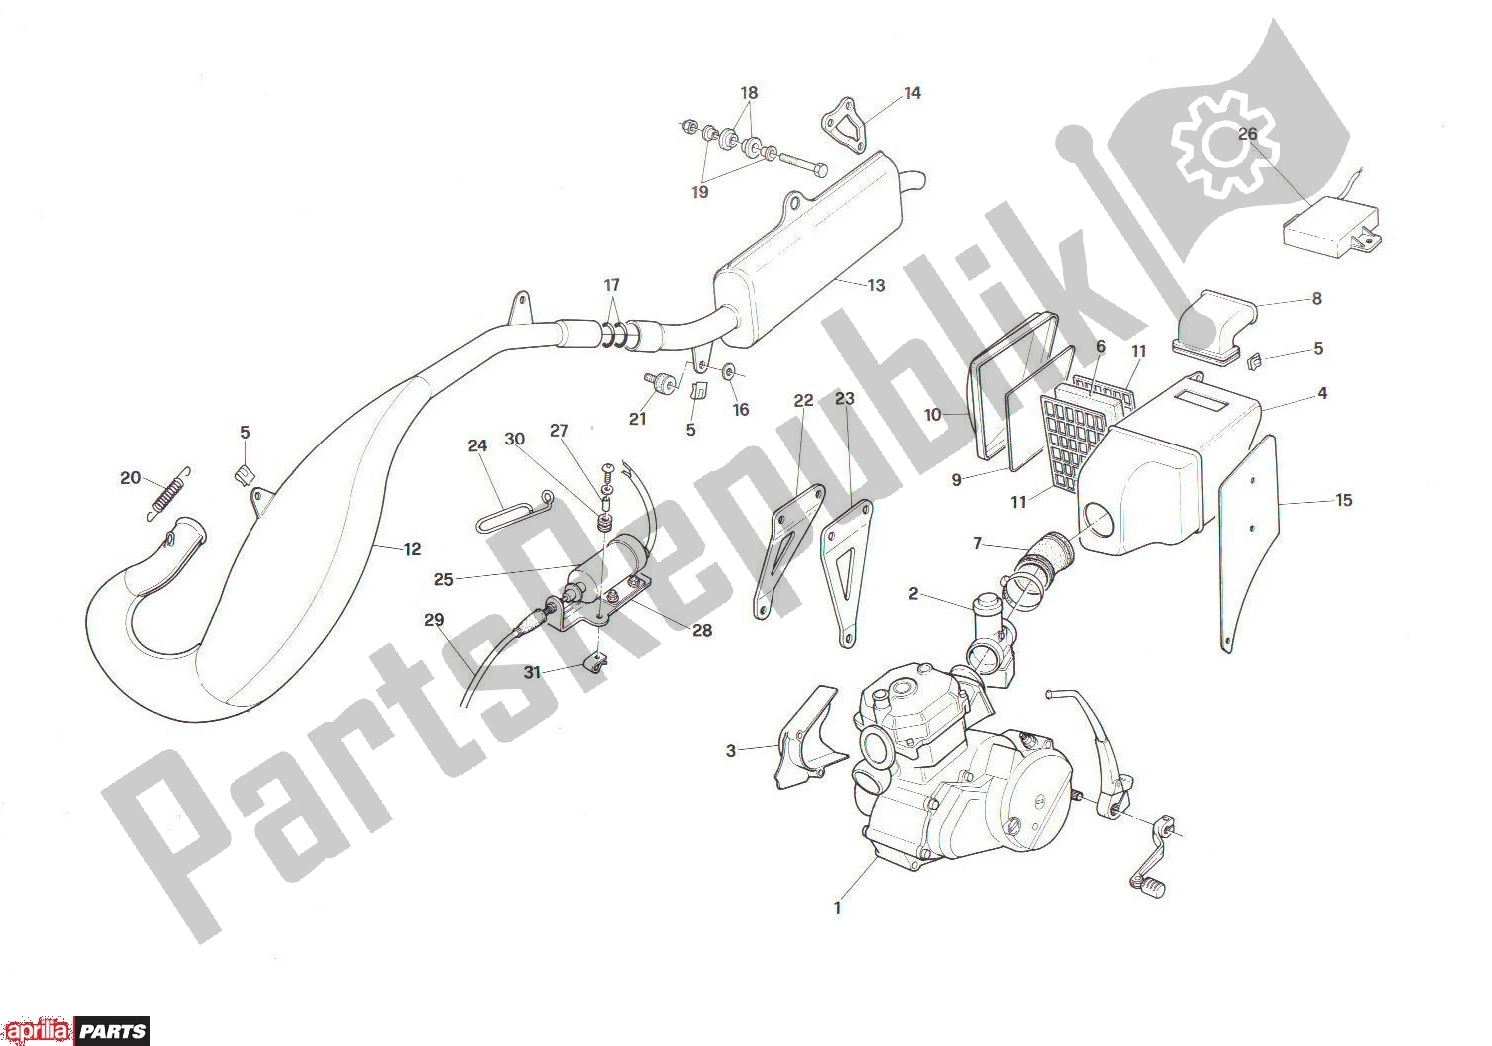 All parts for the Exhaust of the Aprilia RX 101 125 1989